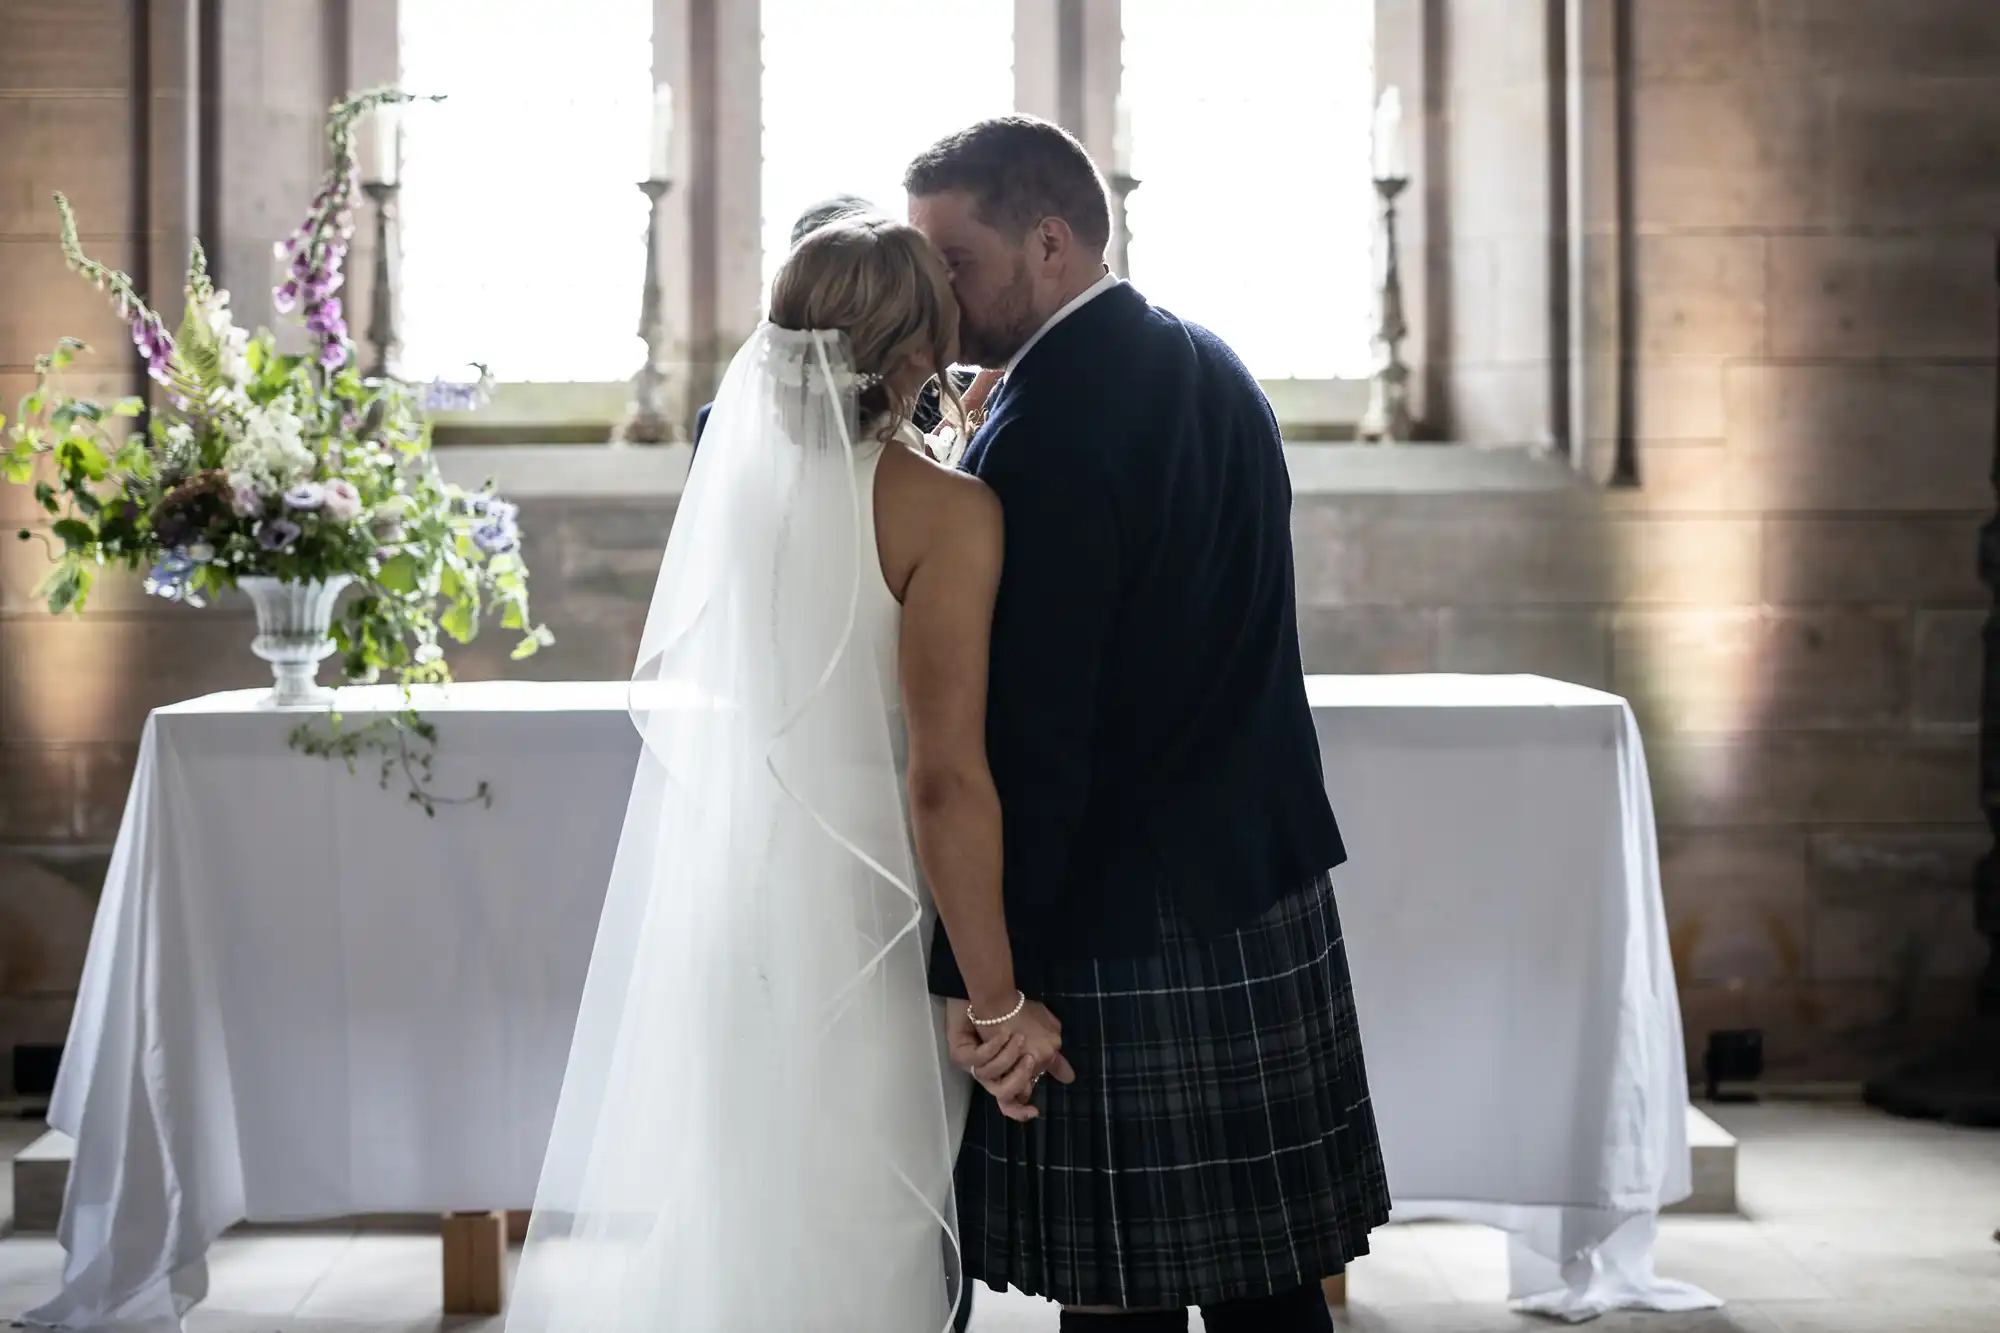 Bride and groom kissing in a church, groom in a kilt, with a table adorned with a floral arrangement in the background.